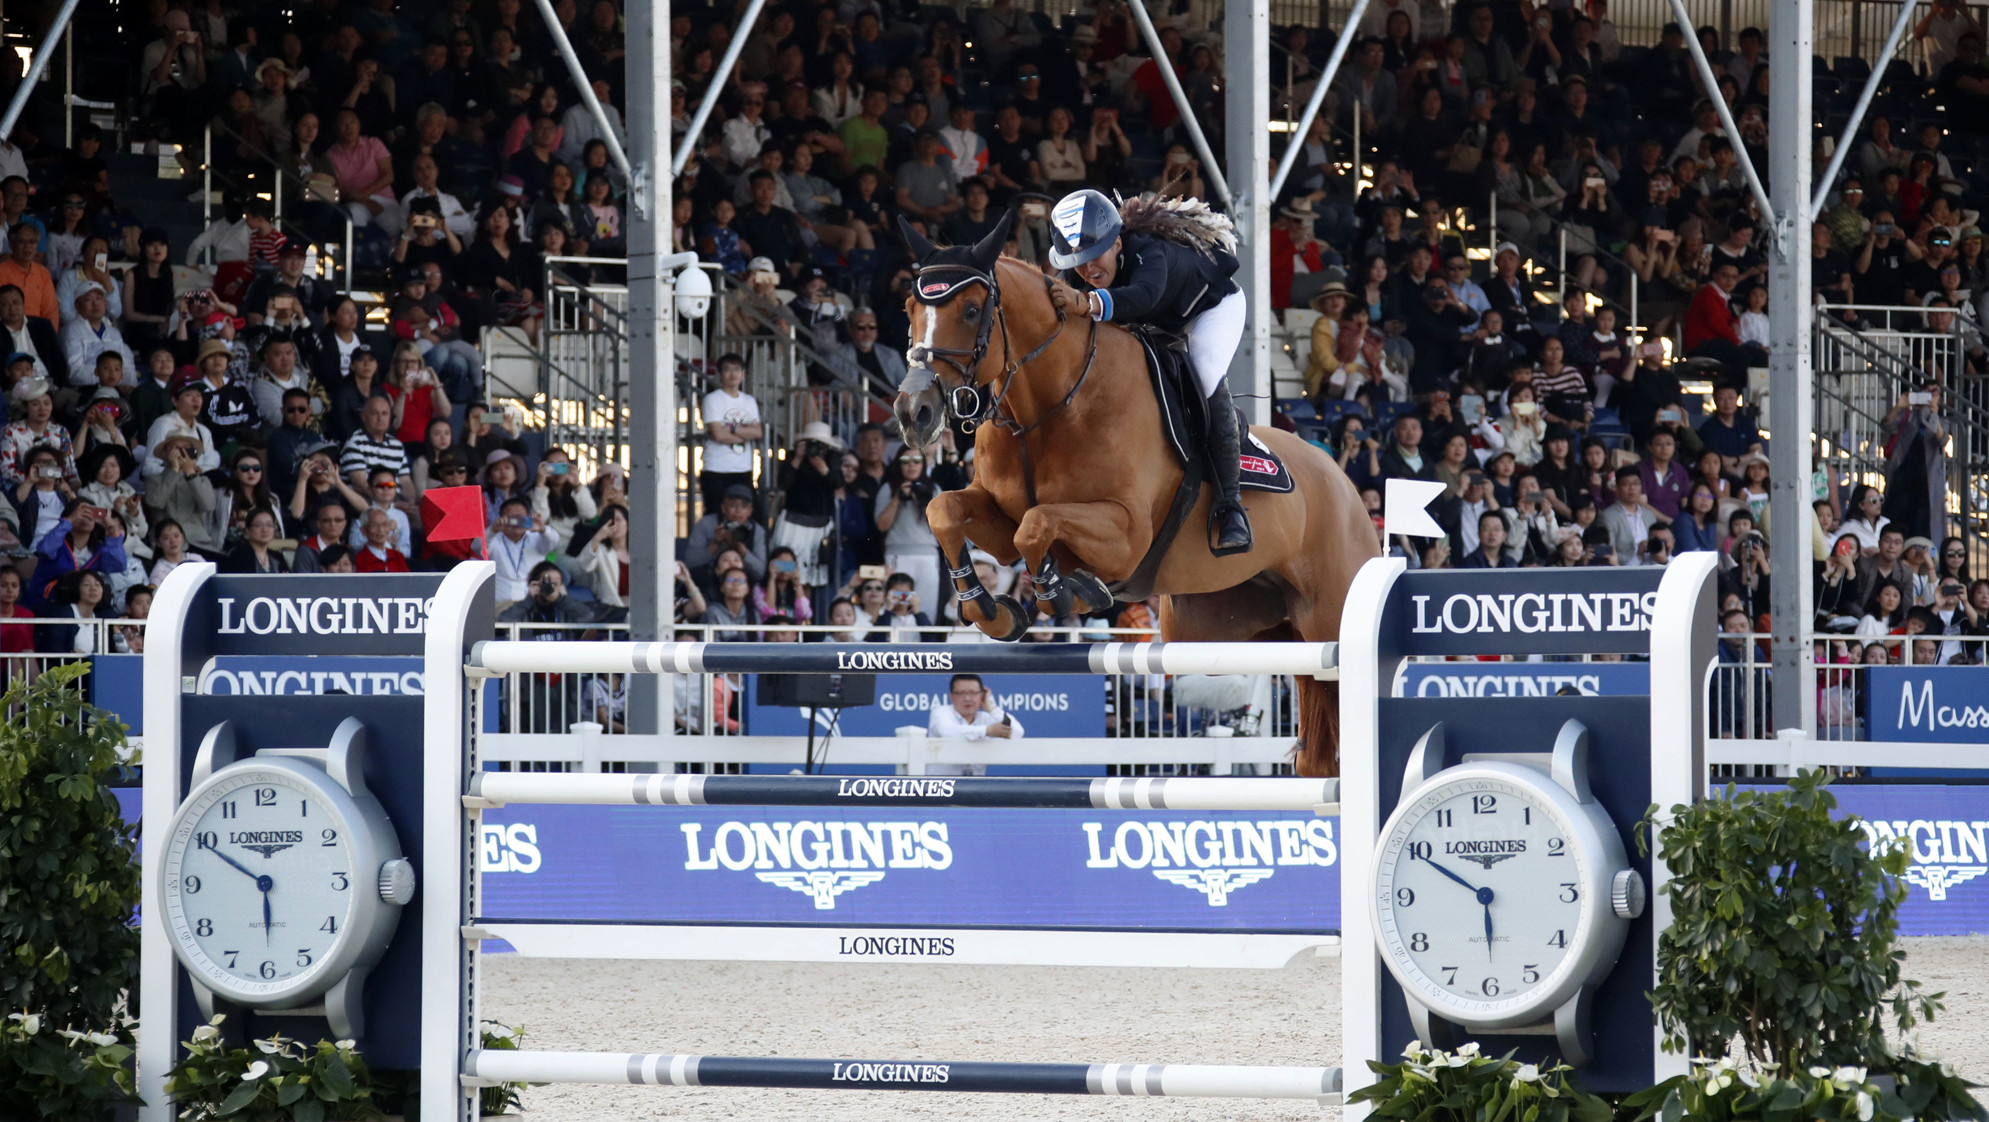 Goldstein becomes first woman to win Shanghai Longines Global Champions Tour Grand Prix